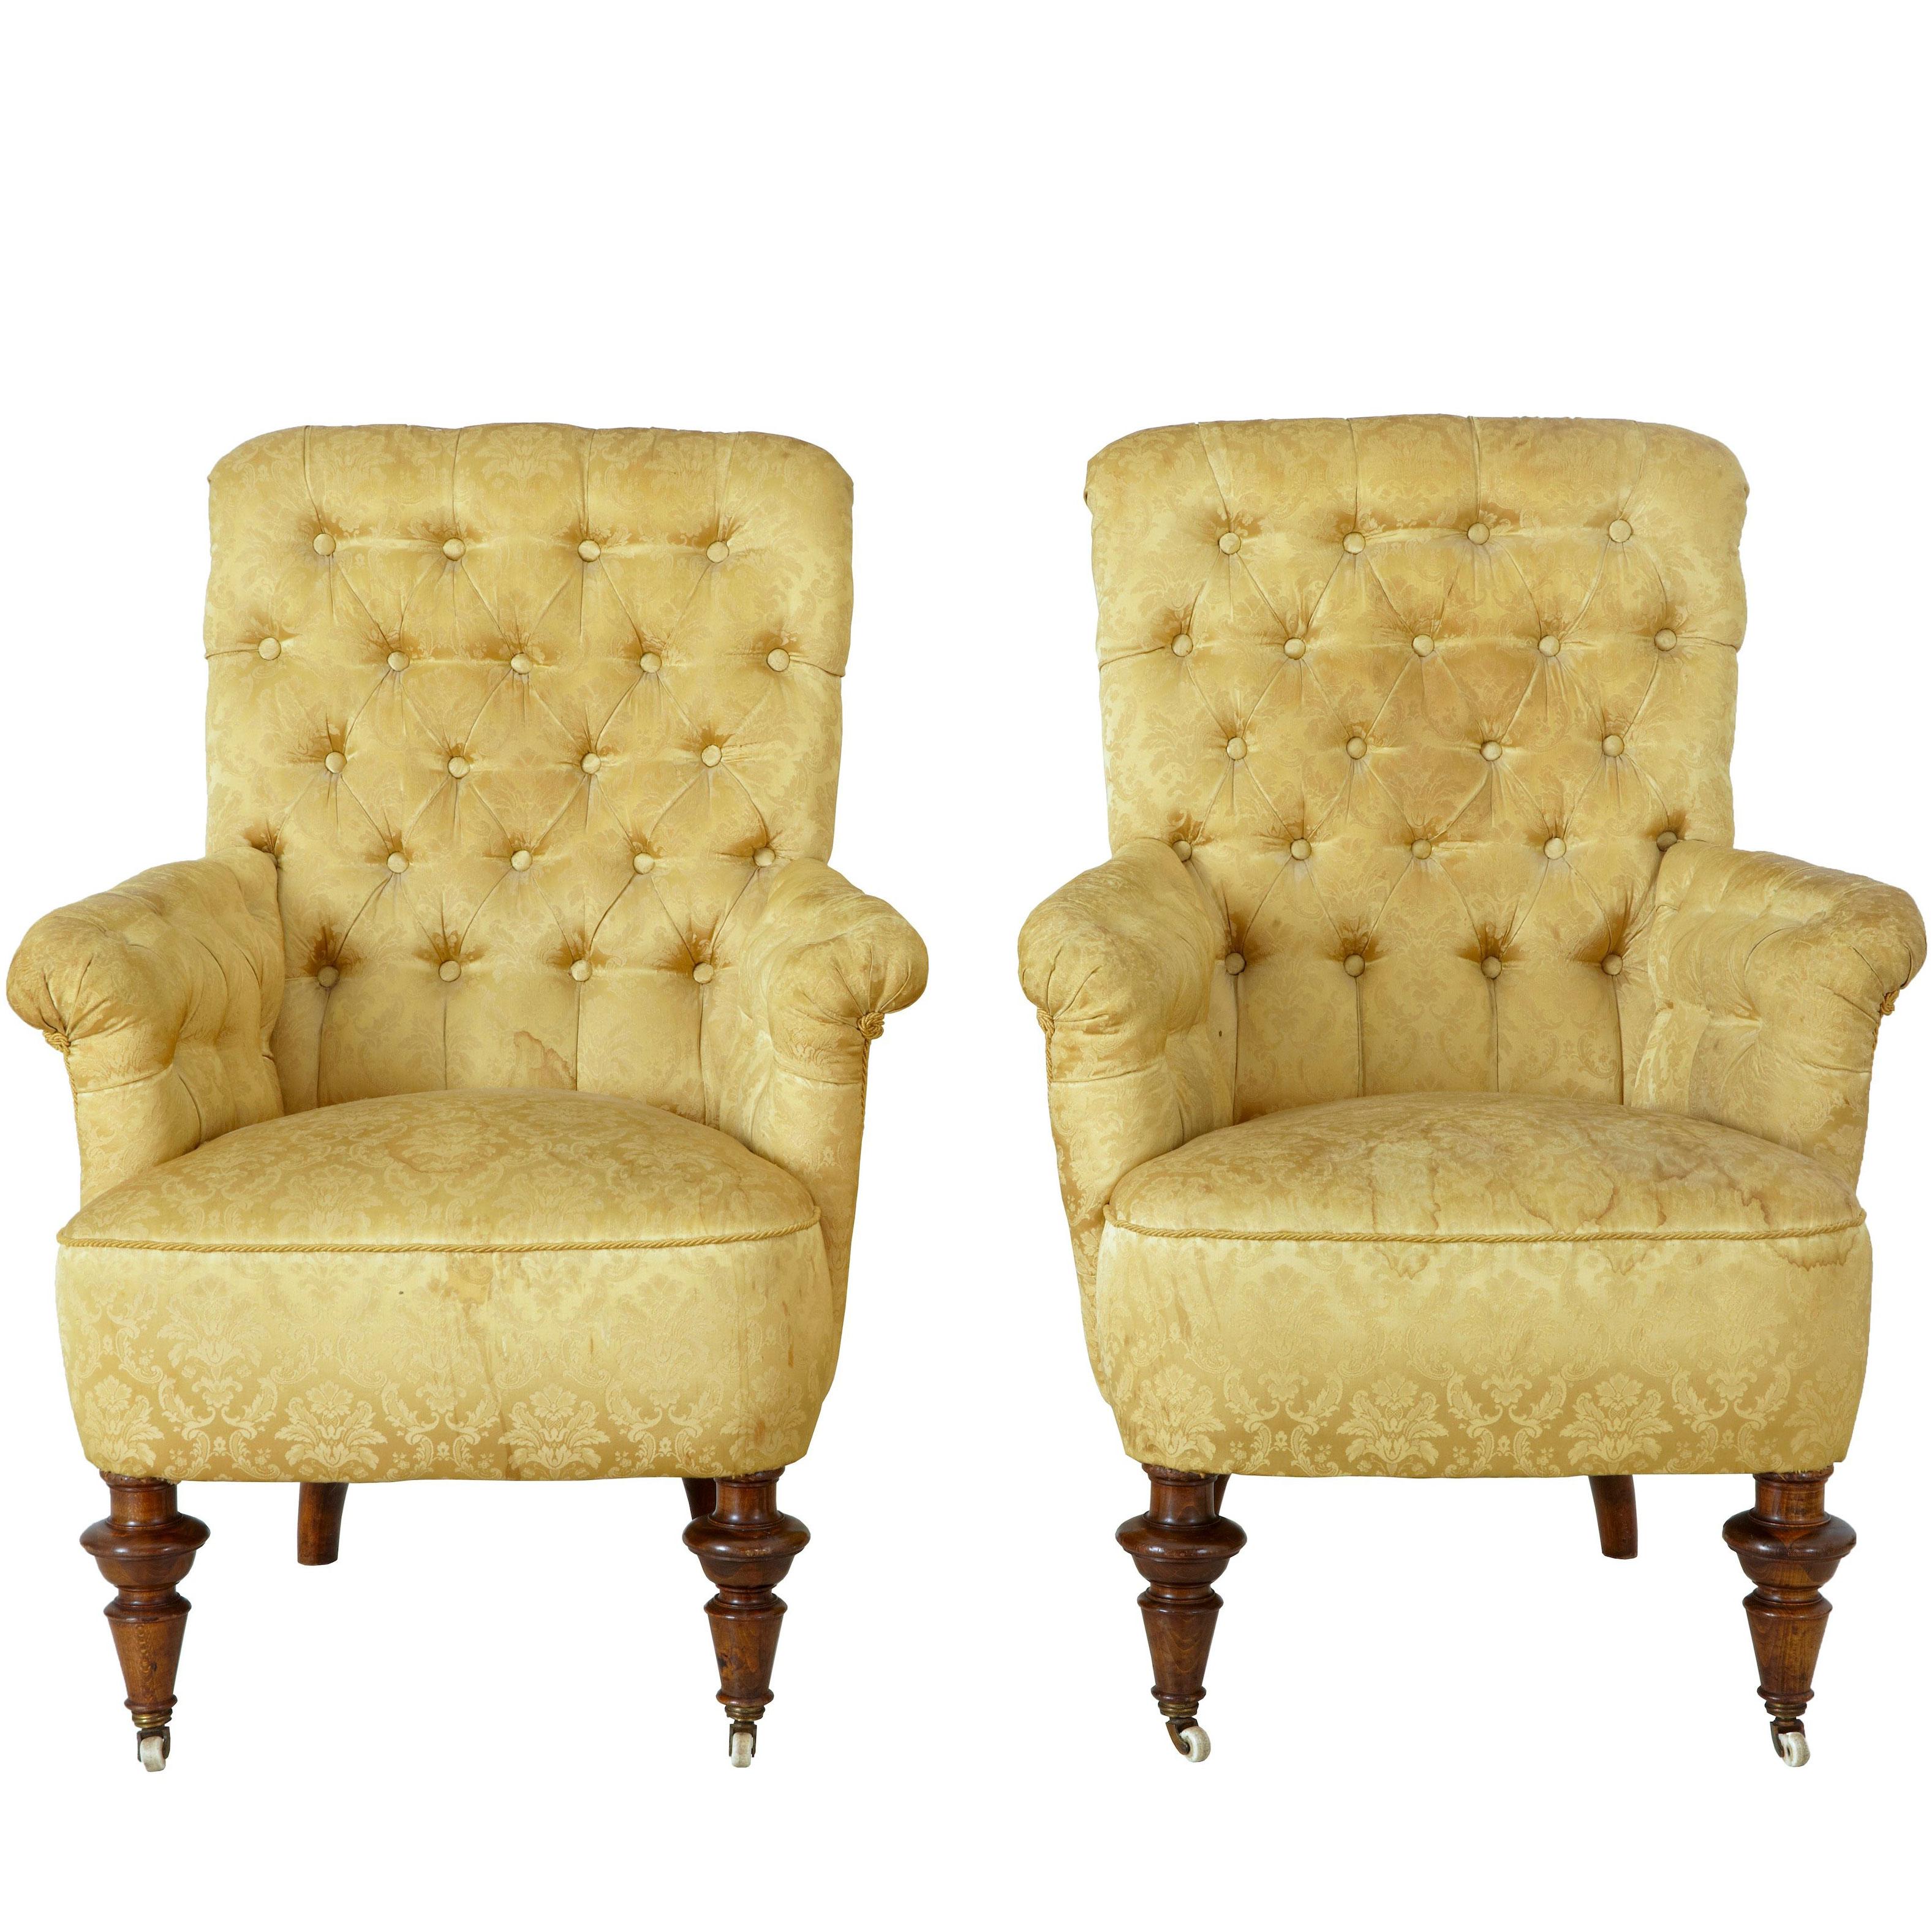 Pair of 19th Century Victorian Button Back Armchairs